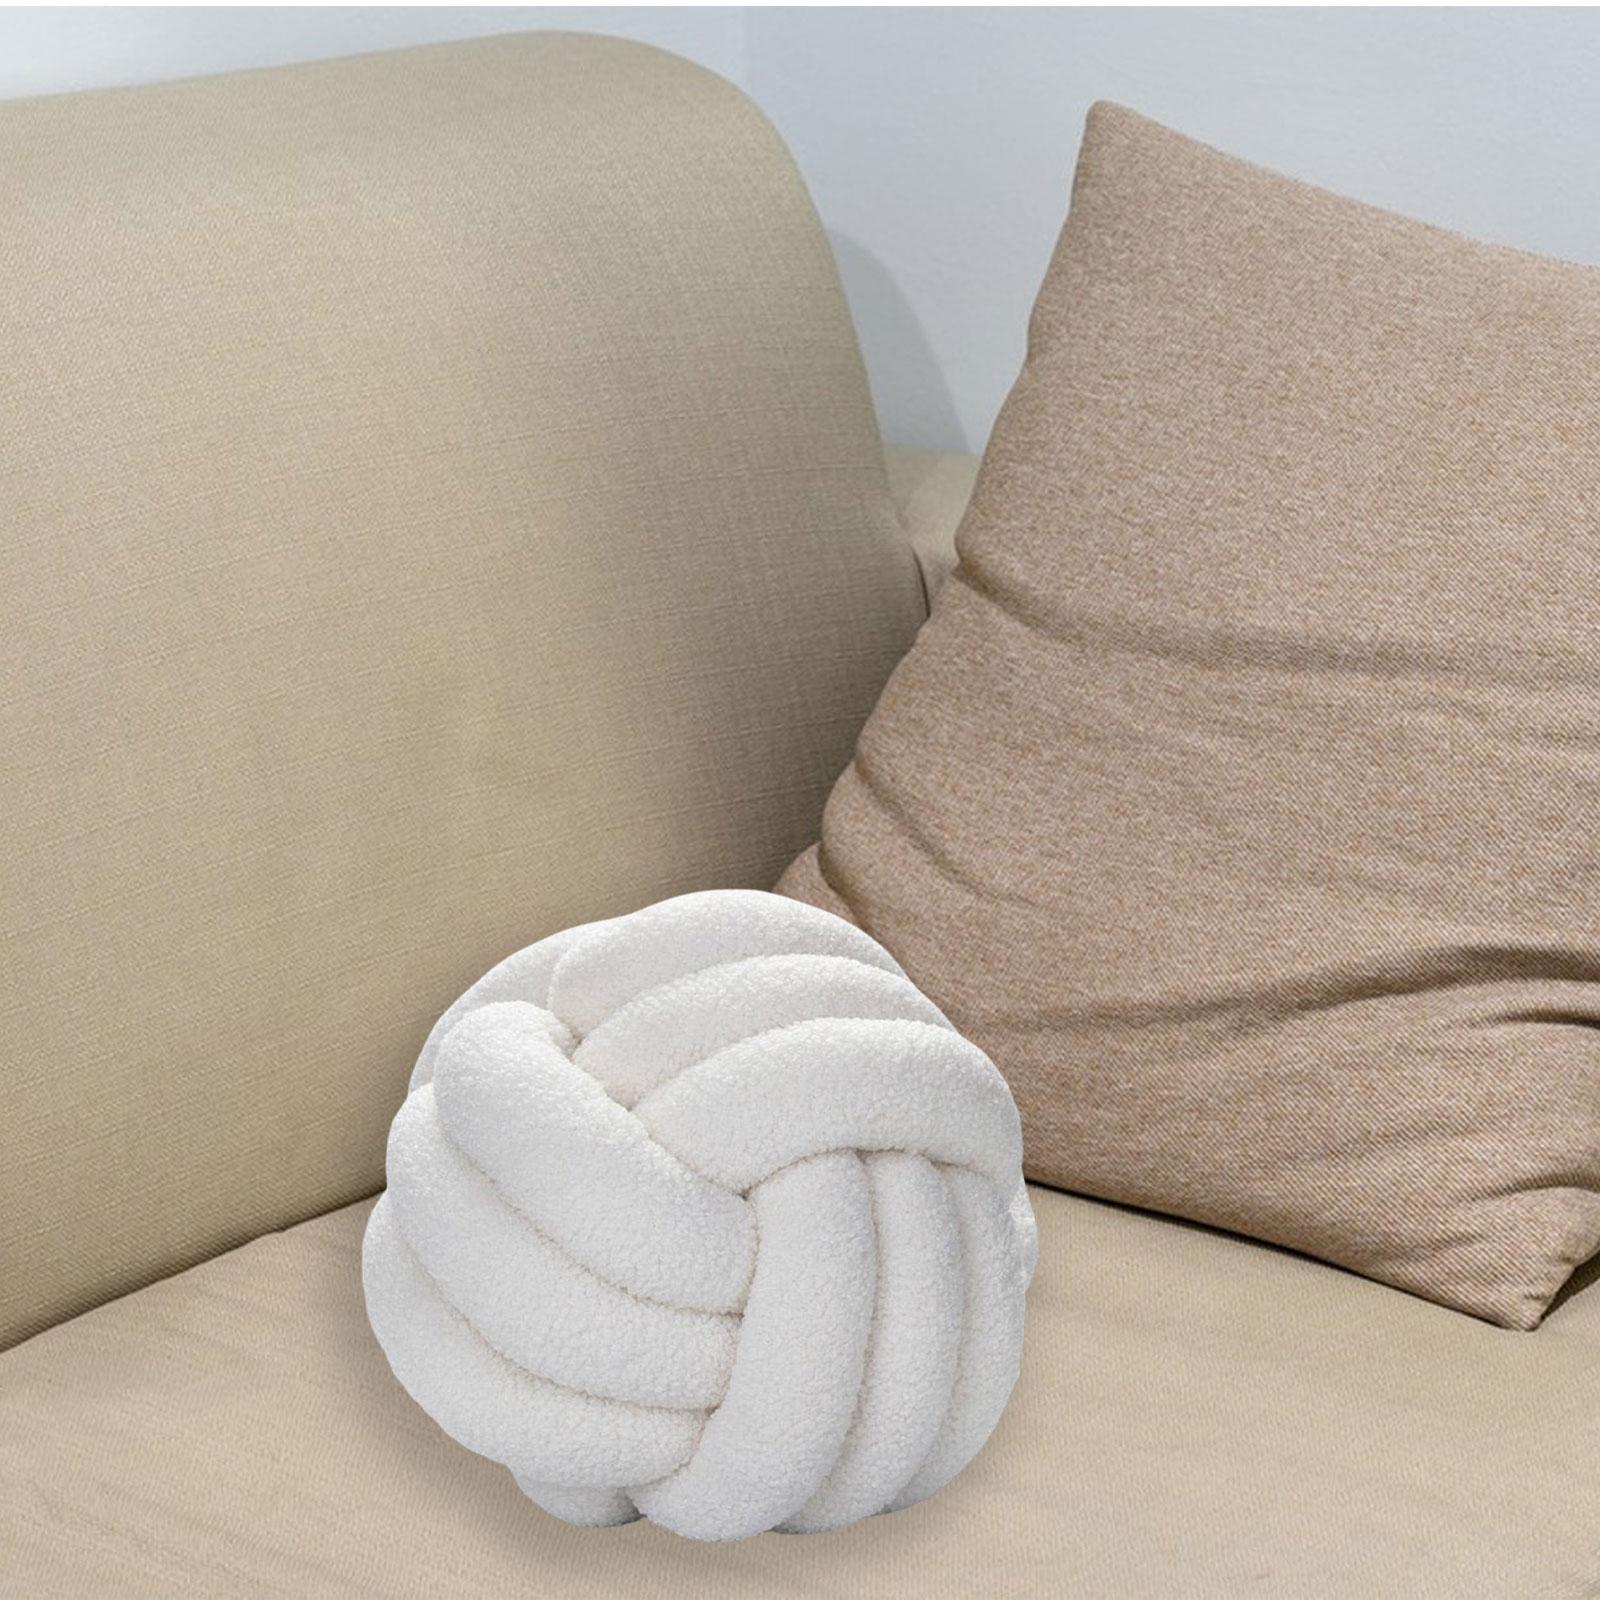 Plush Knot Ball Pillow Diameter 22cm Room Decoration for sofa Couch White